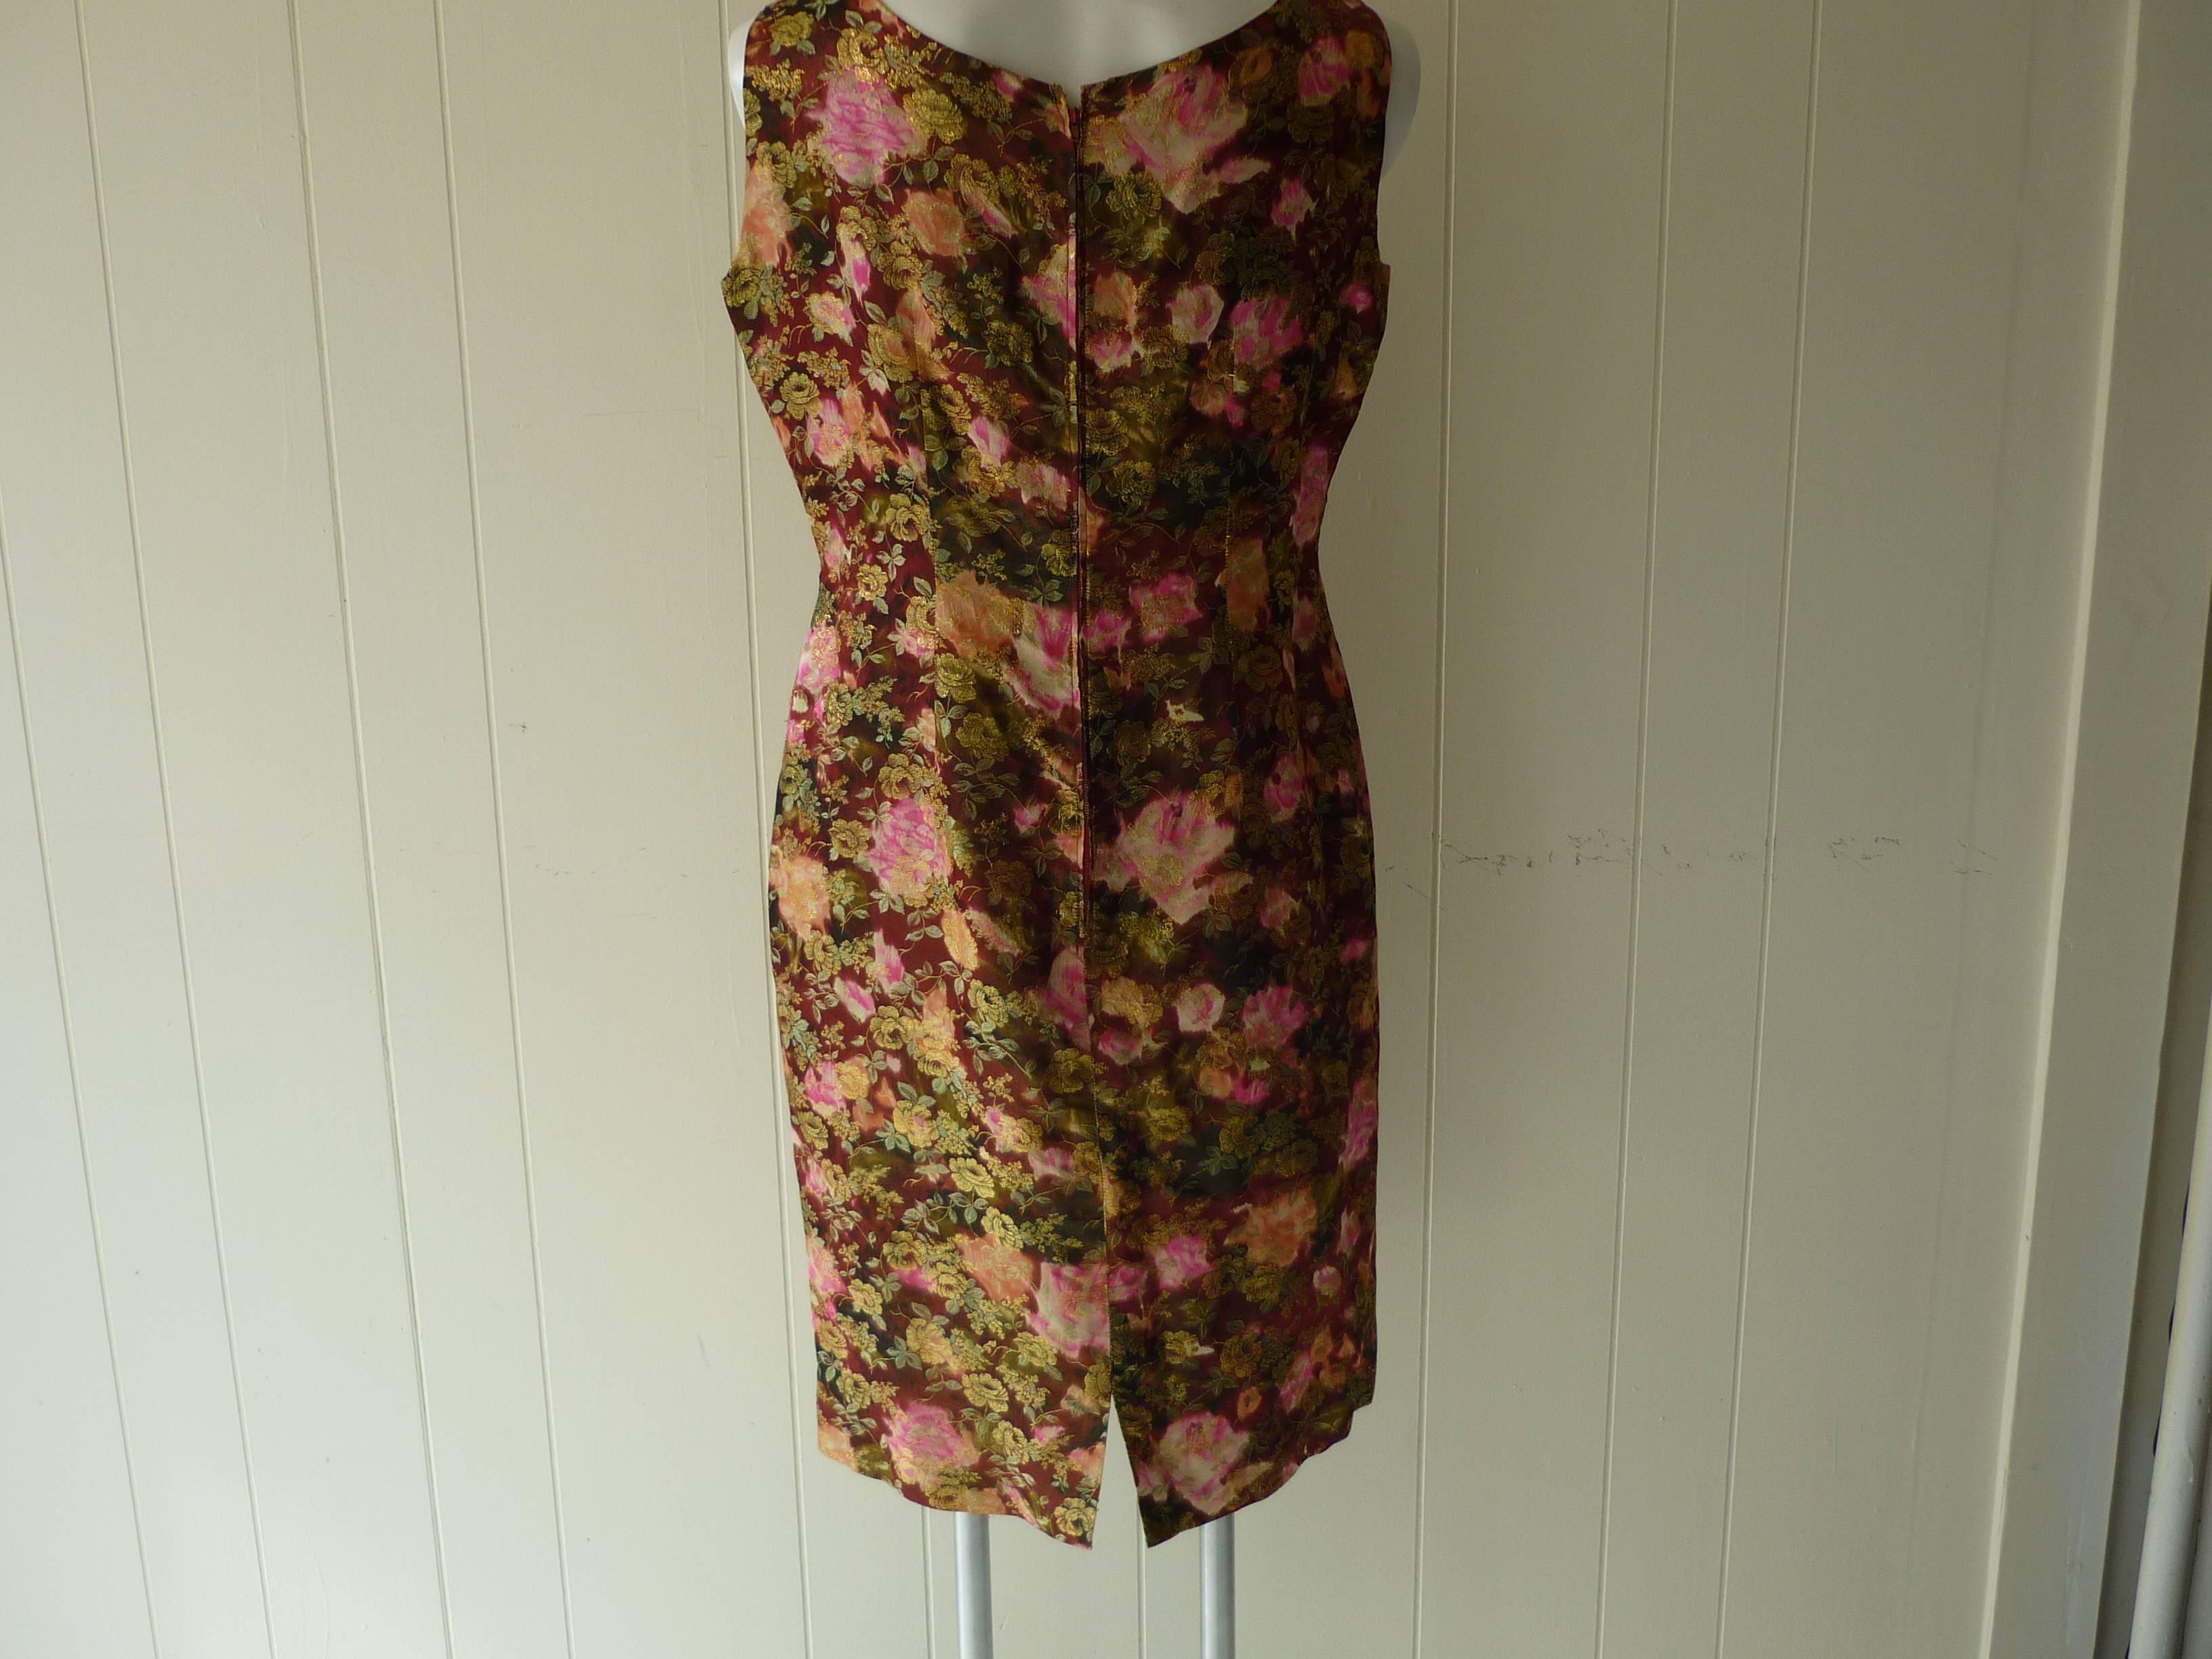 Lovely dress with pink and orange roses, green leaves, some brown and overlayed with gold accents.

Closure is by way of a zipper in the back, and the lining is burgundy.